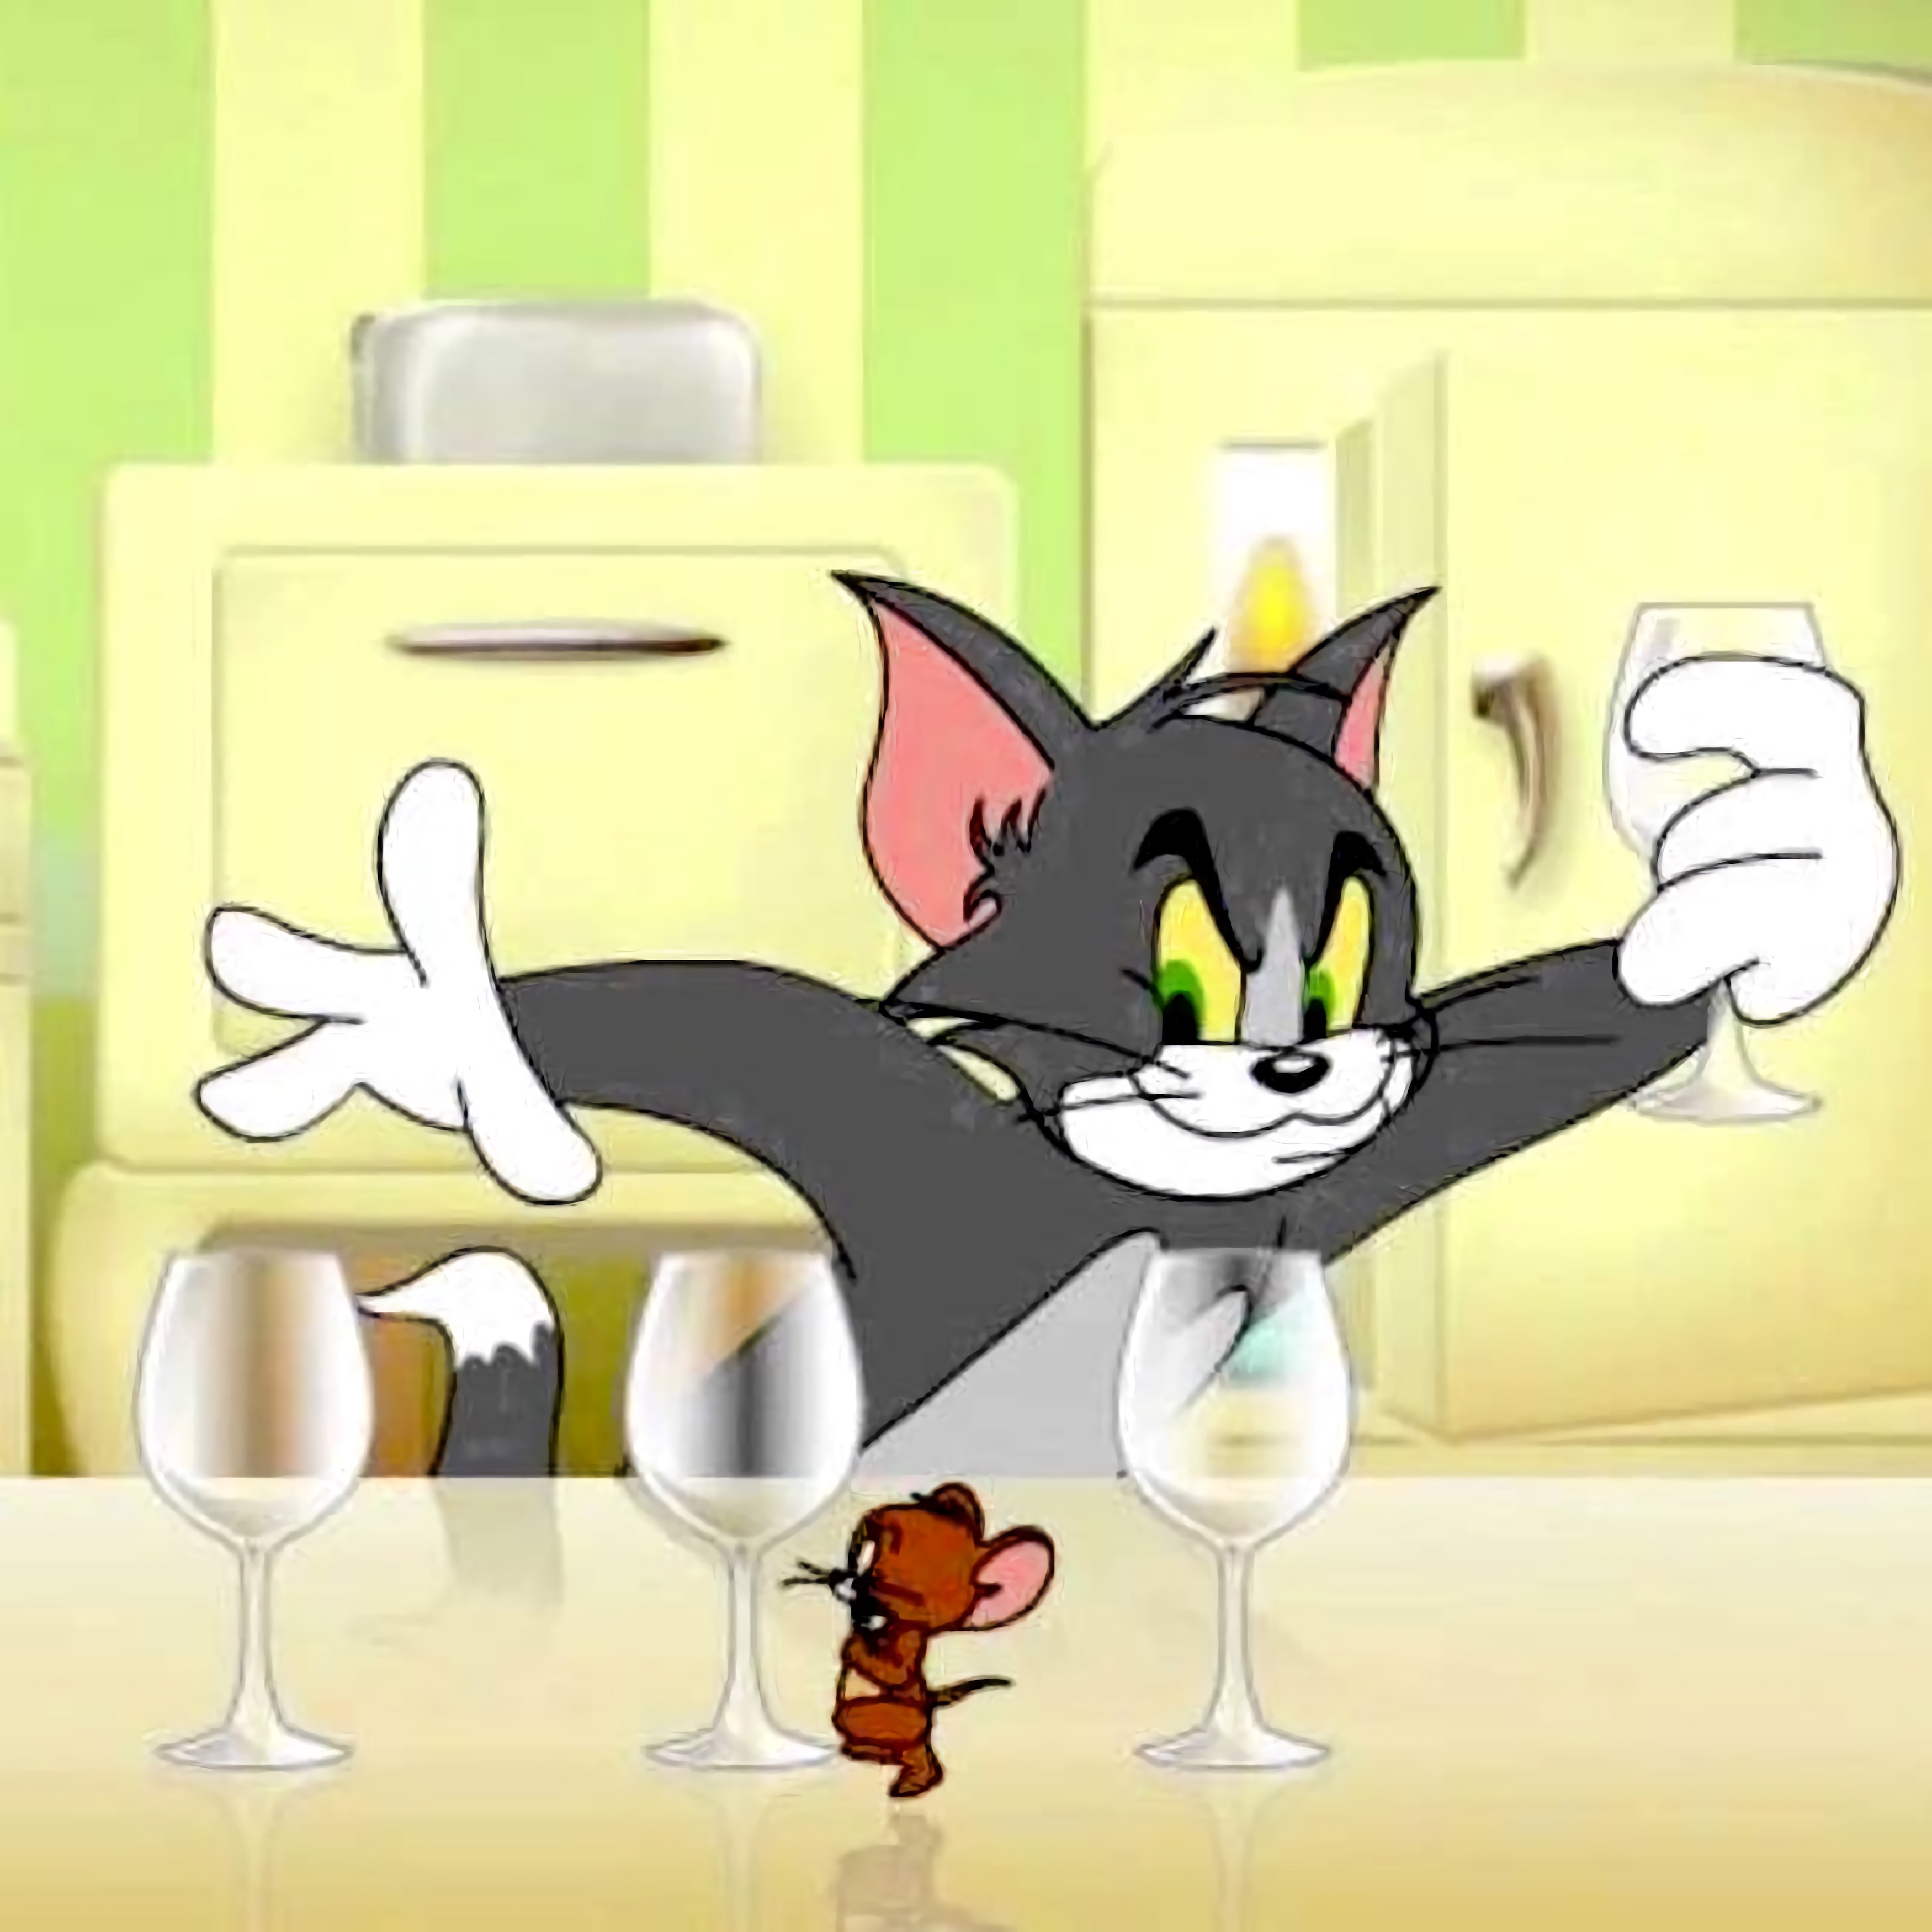 Tom and Jerry: Dont Make A Mess